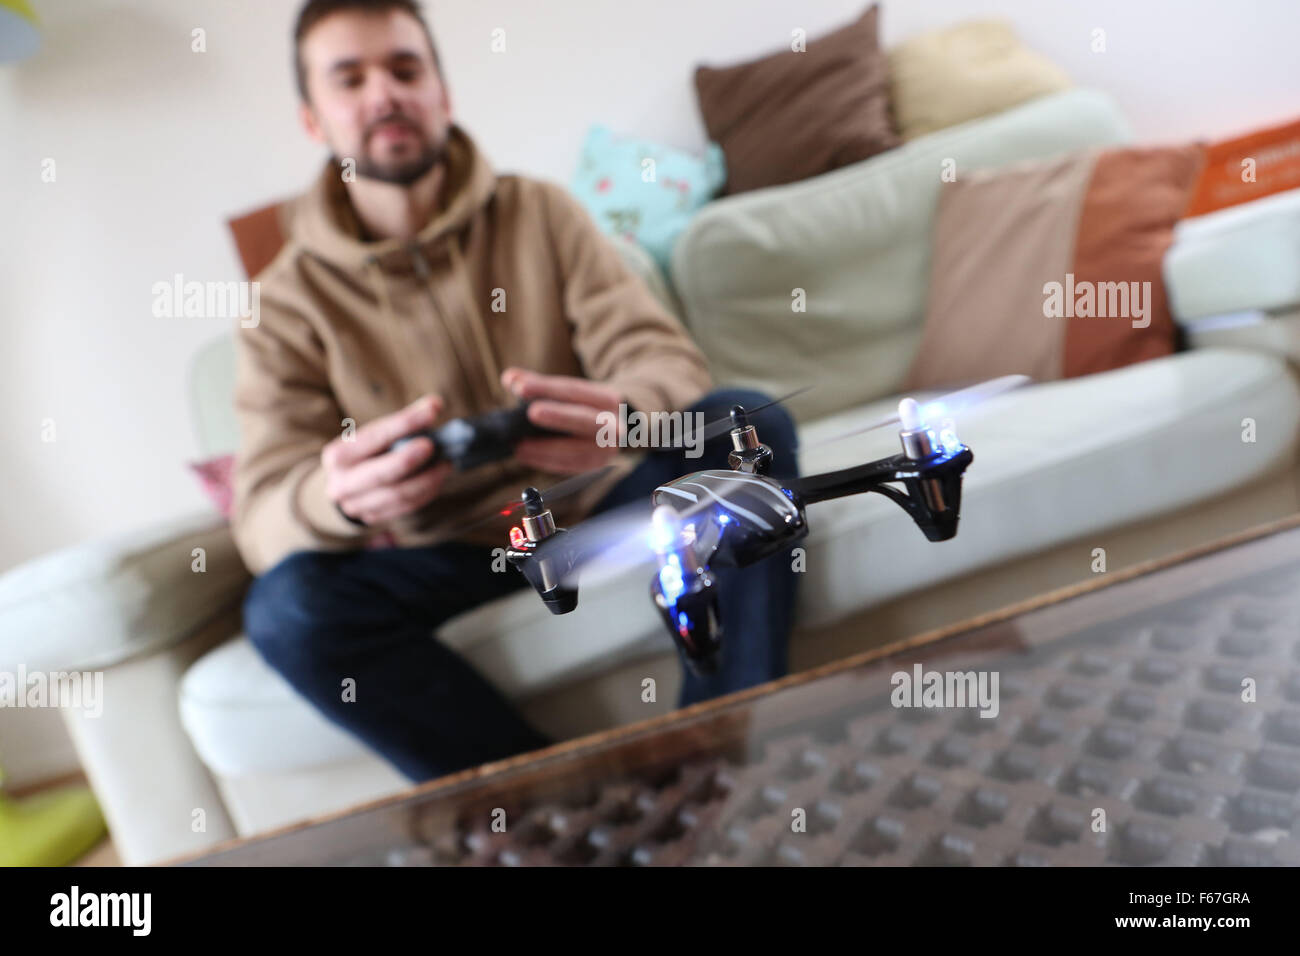 Generic illustration on the theme of recreational drones (unmanned aerial vehicles) Stock Photo